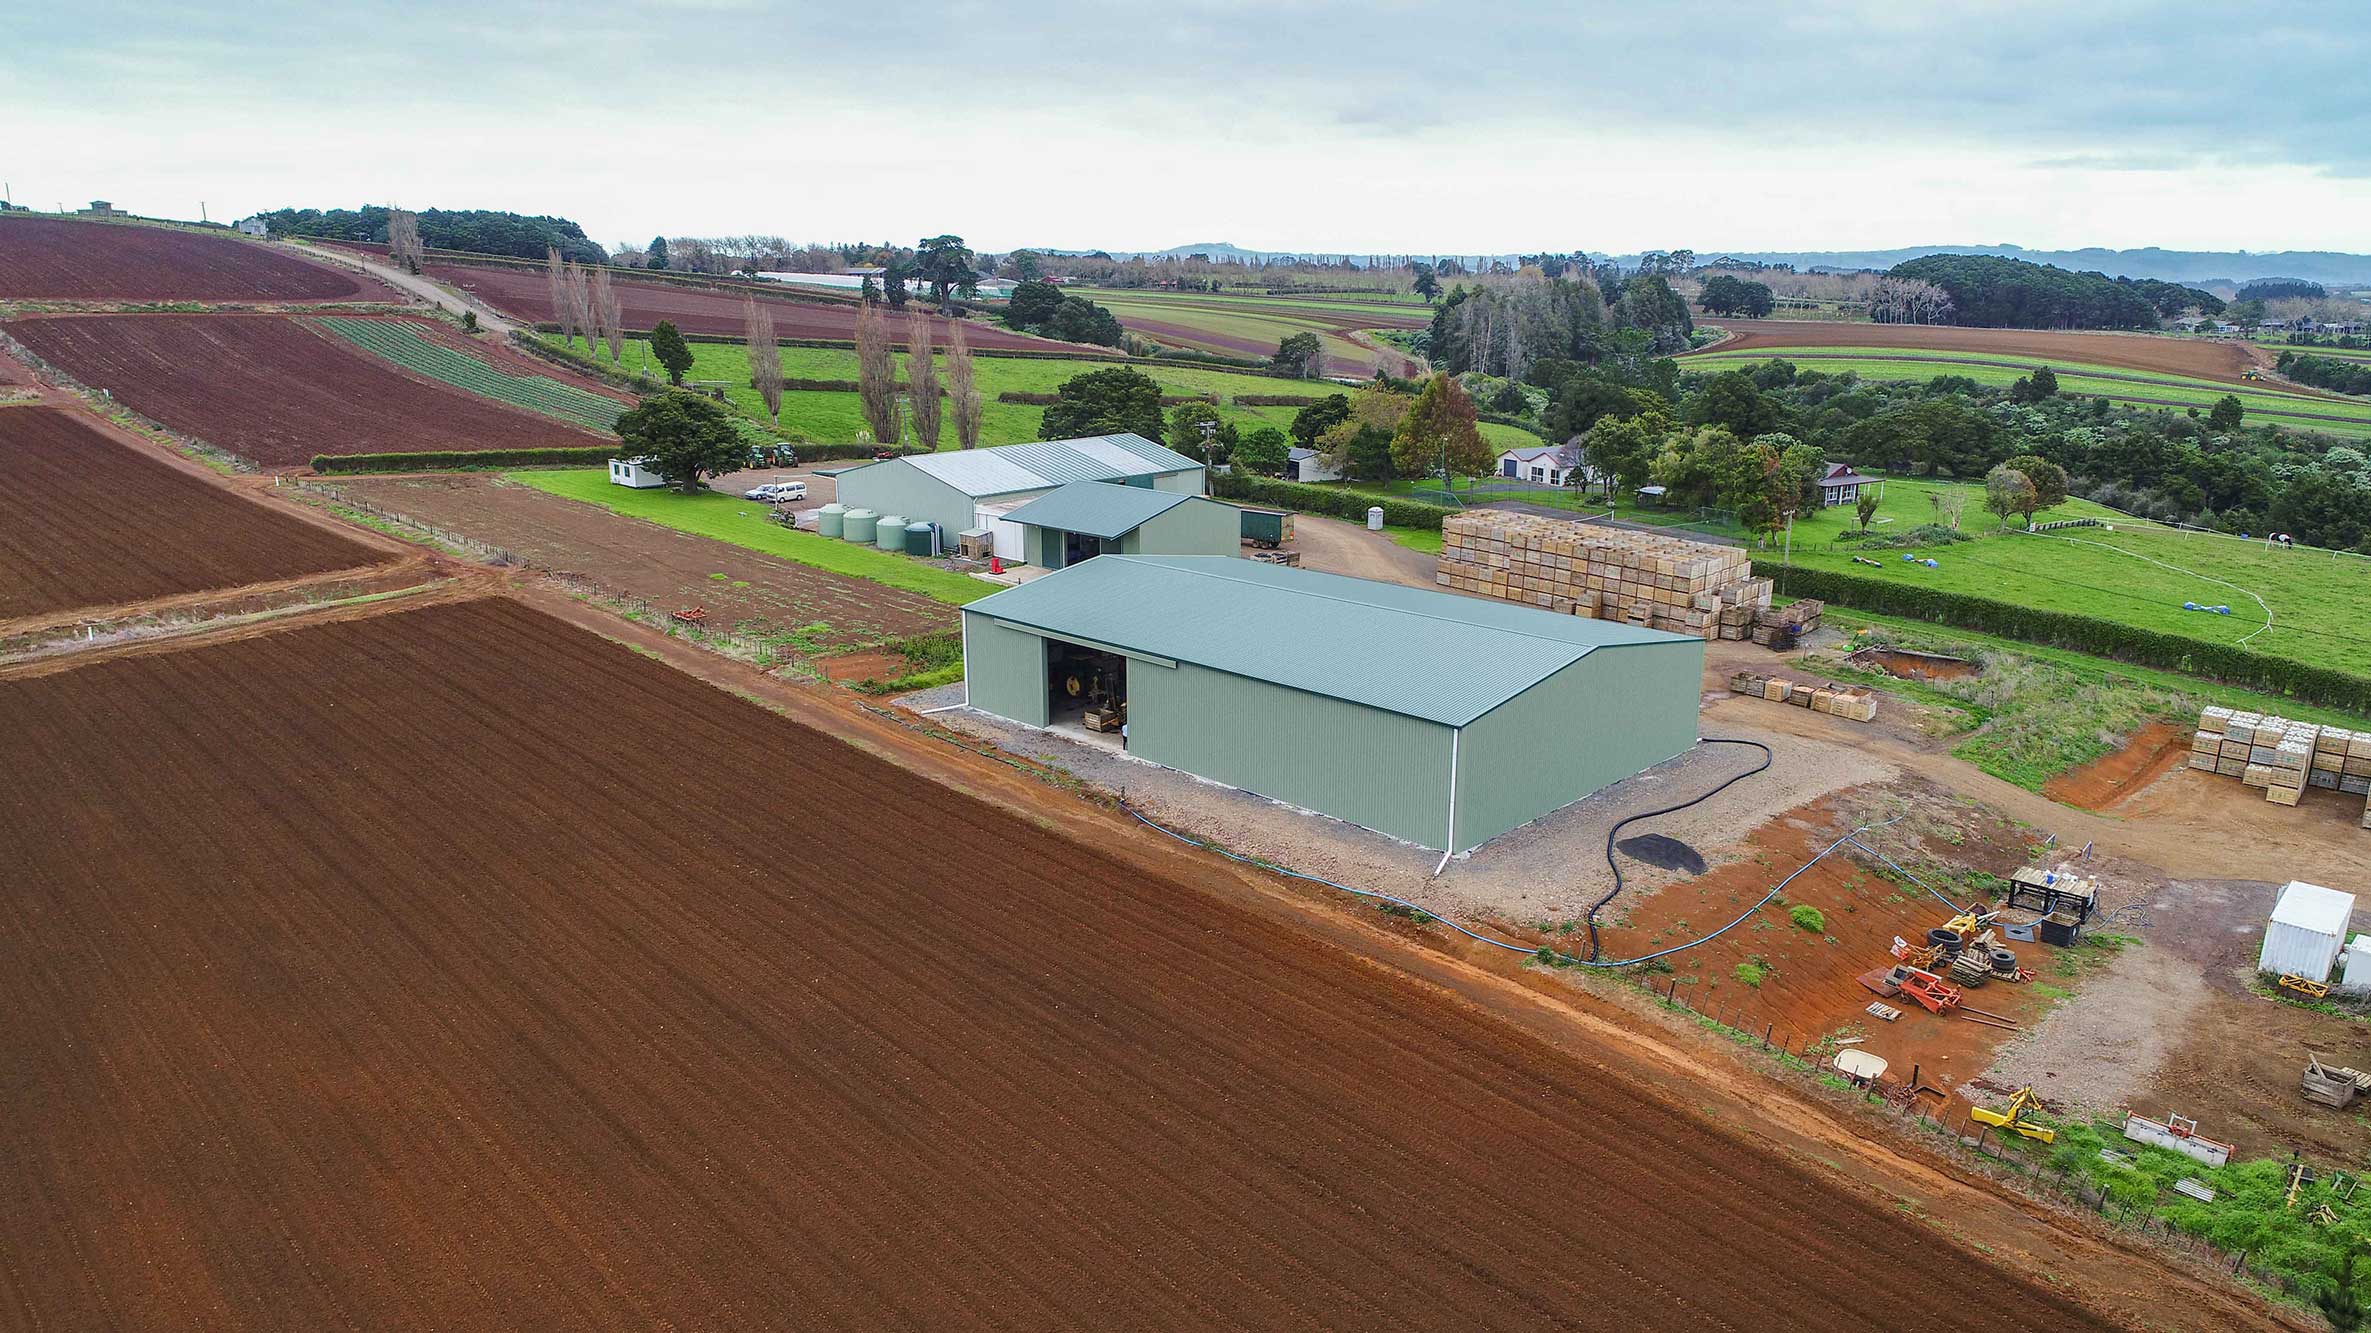 Commercial produce storage building